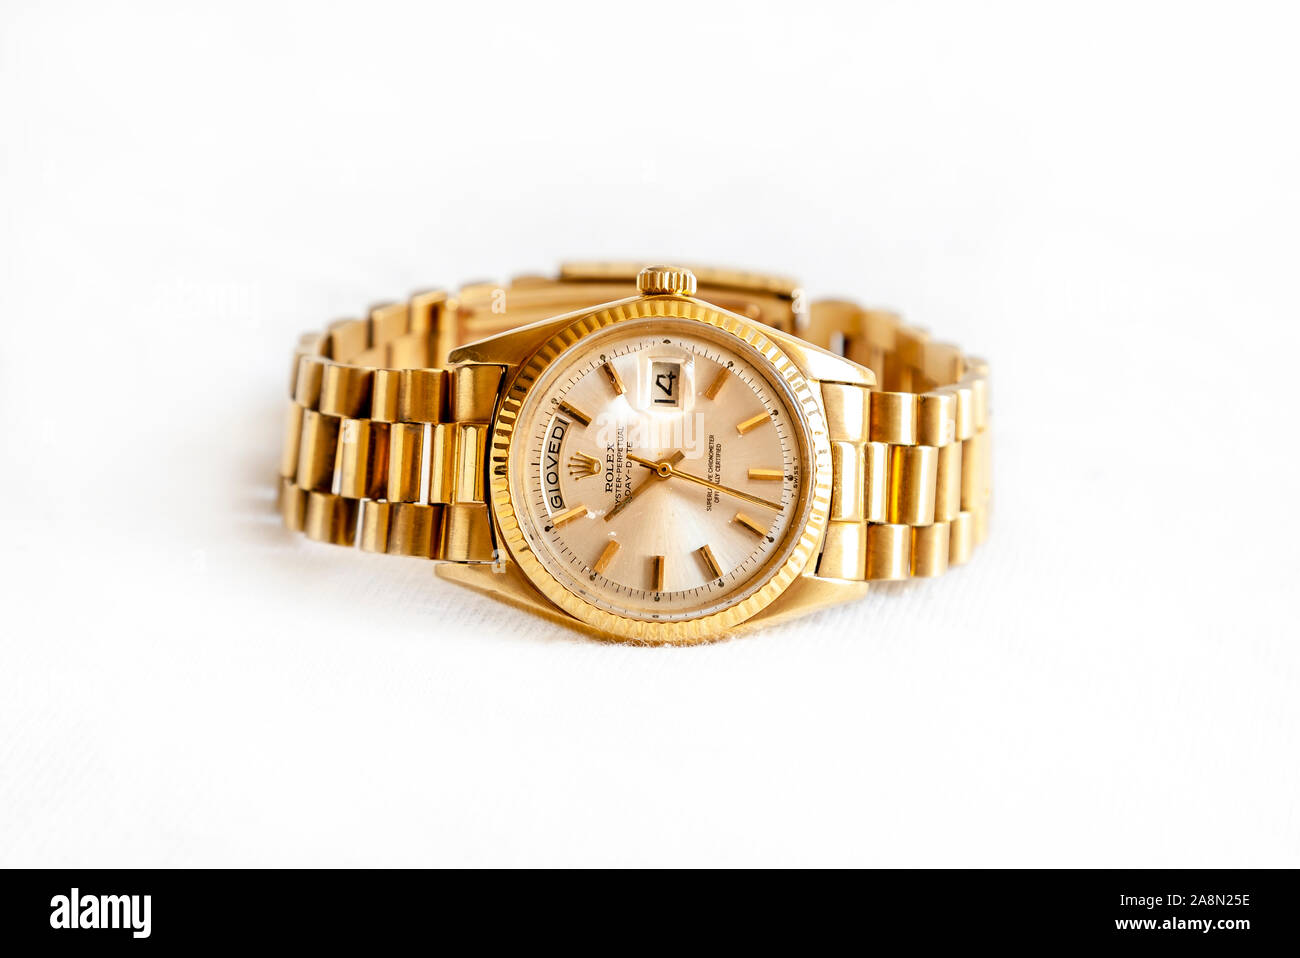 CREMONA, ITALY - MARCH, 2019: Rolex Oyster Perpetual Day- Date watch on white background. Rolex SA is an important Swiss luxury company in the product Stock Photo